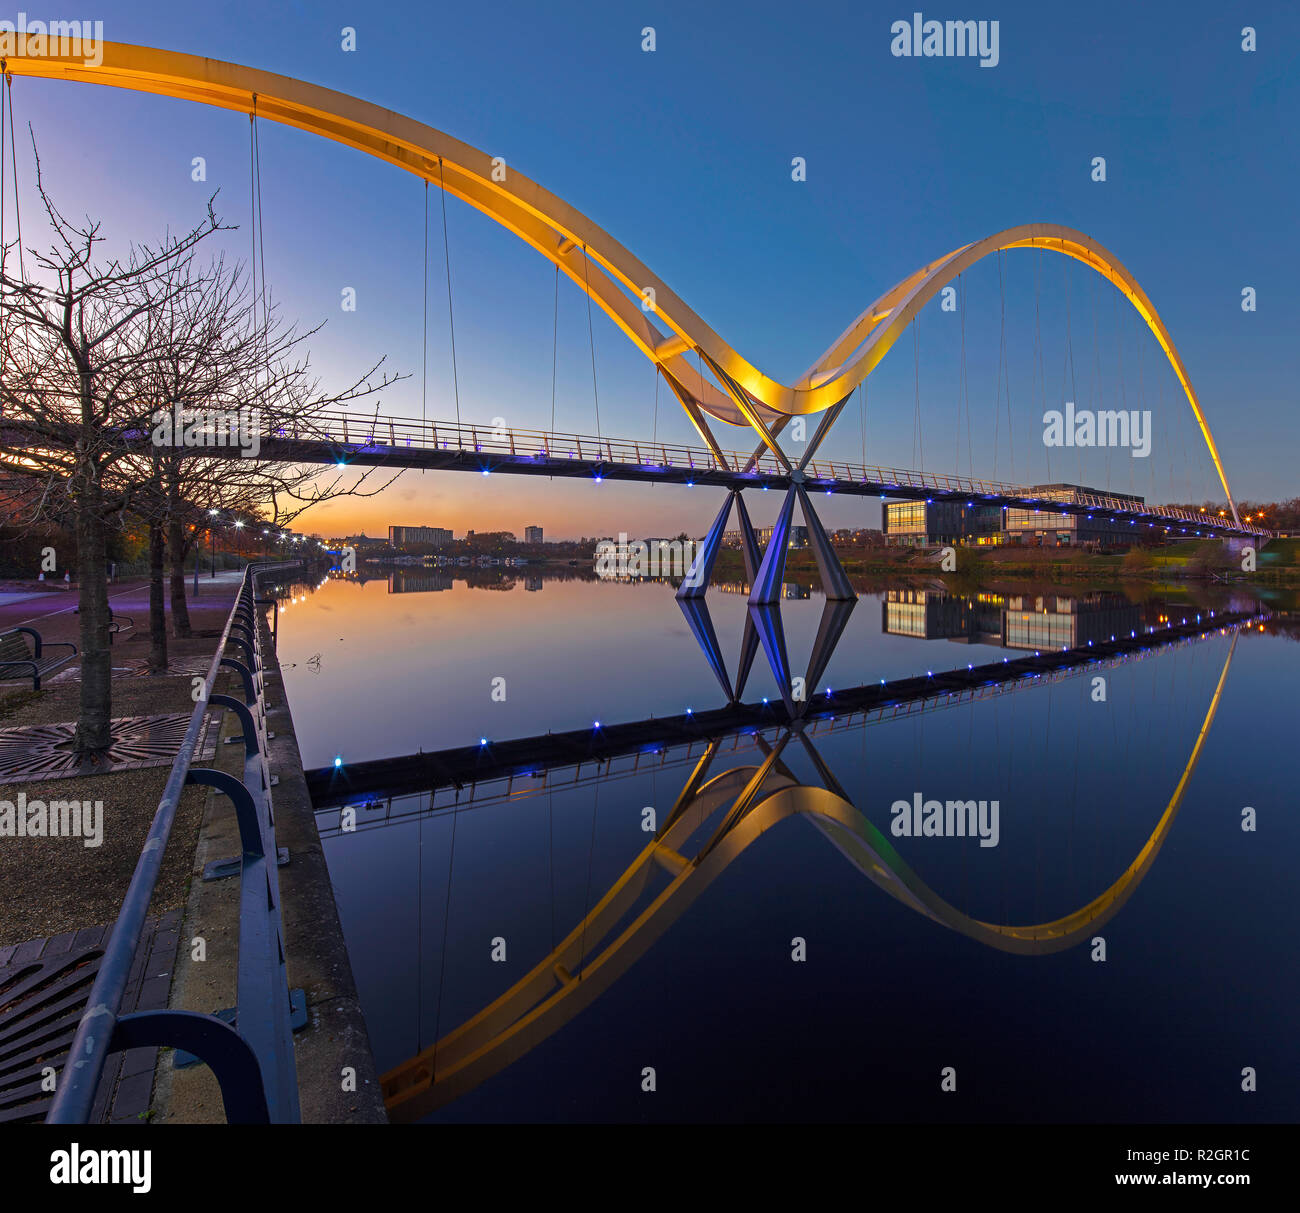 L'Infini bridge at Dusk, Stockton-on-Tees, Tees Valley, UK Banque D'Images